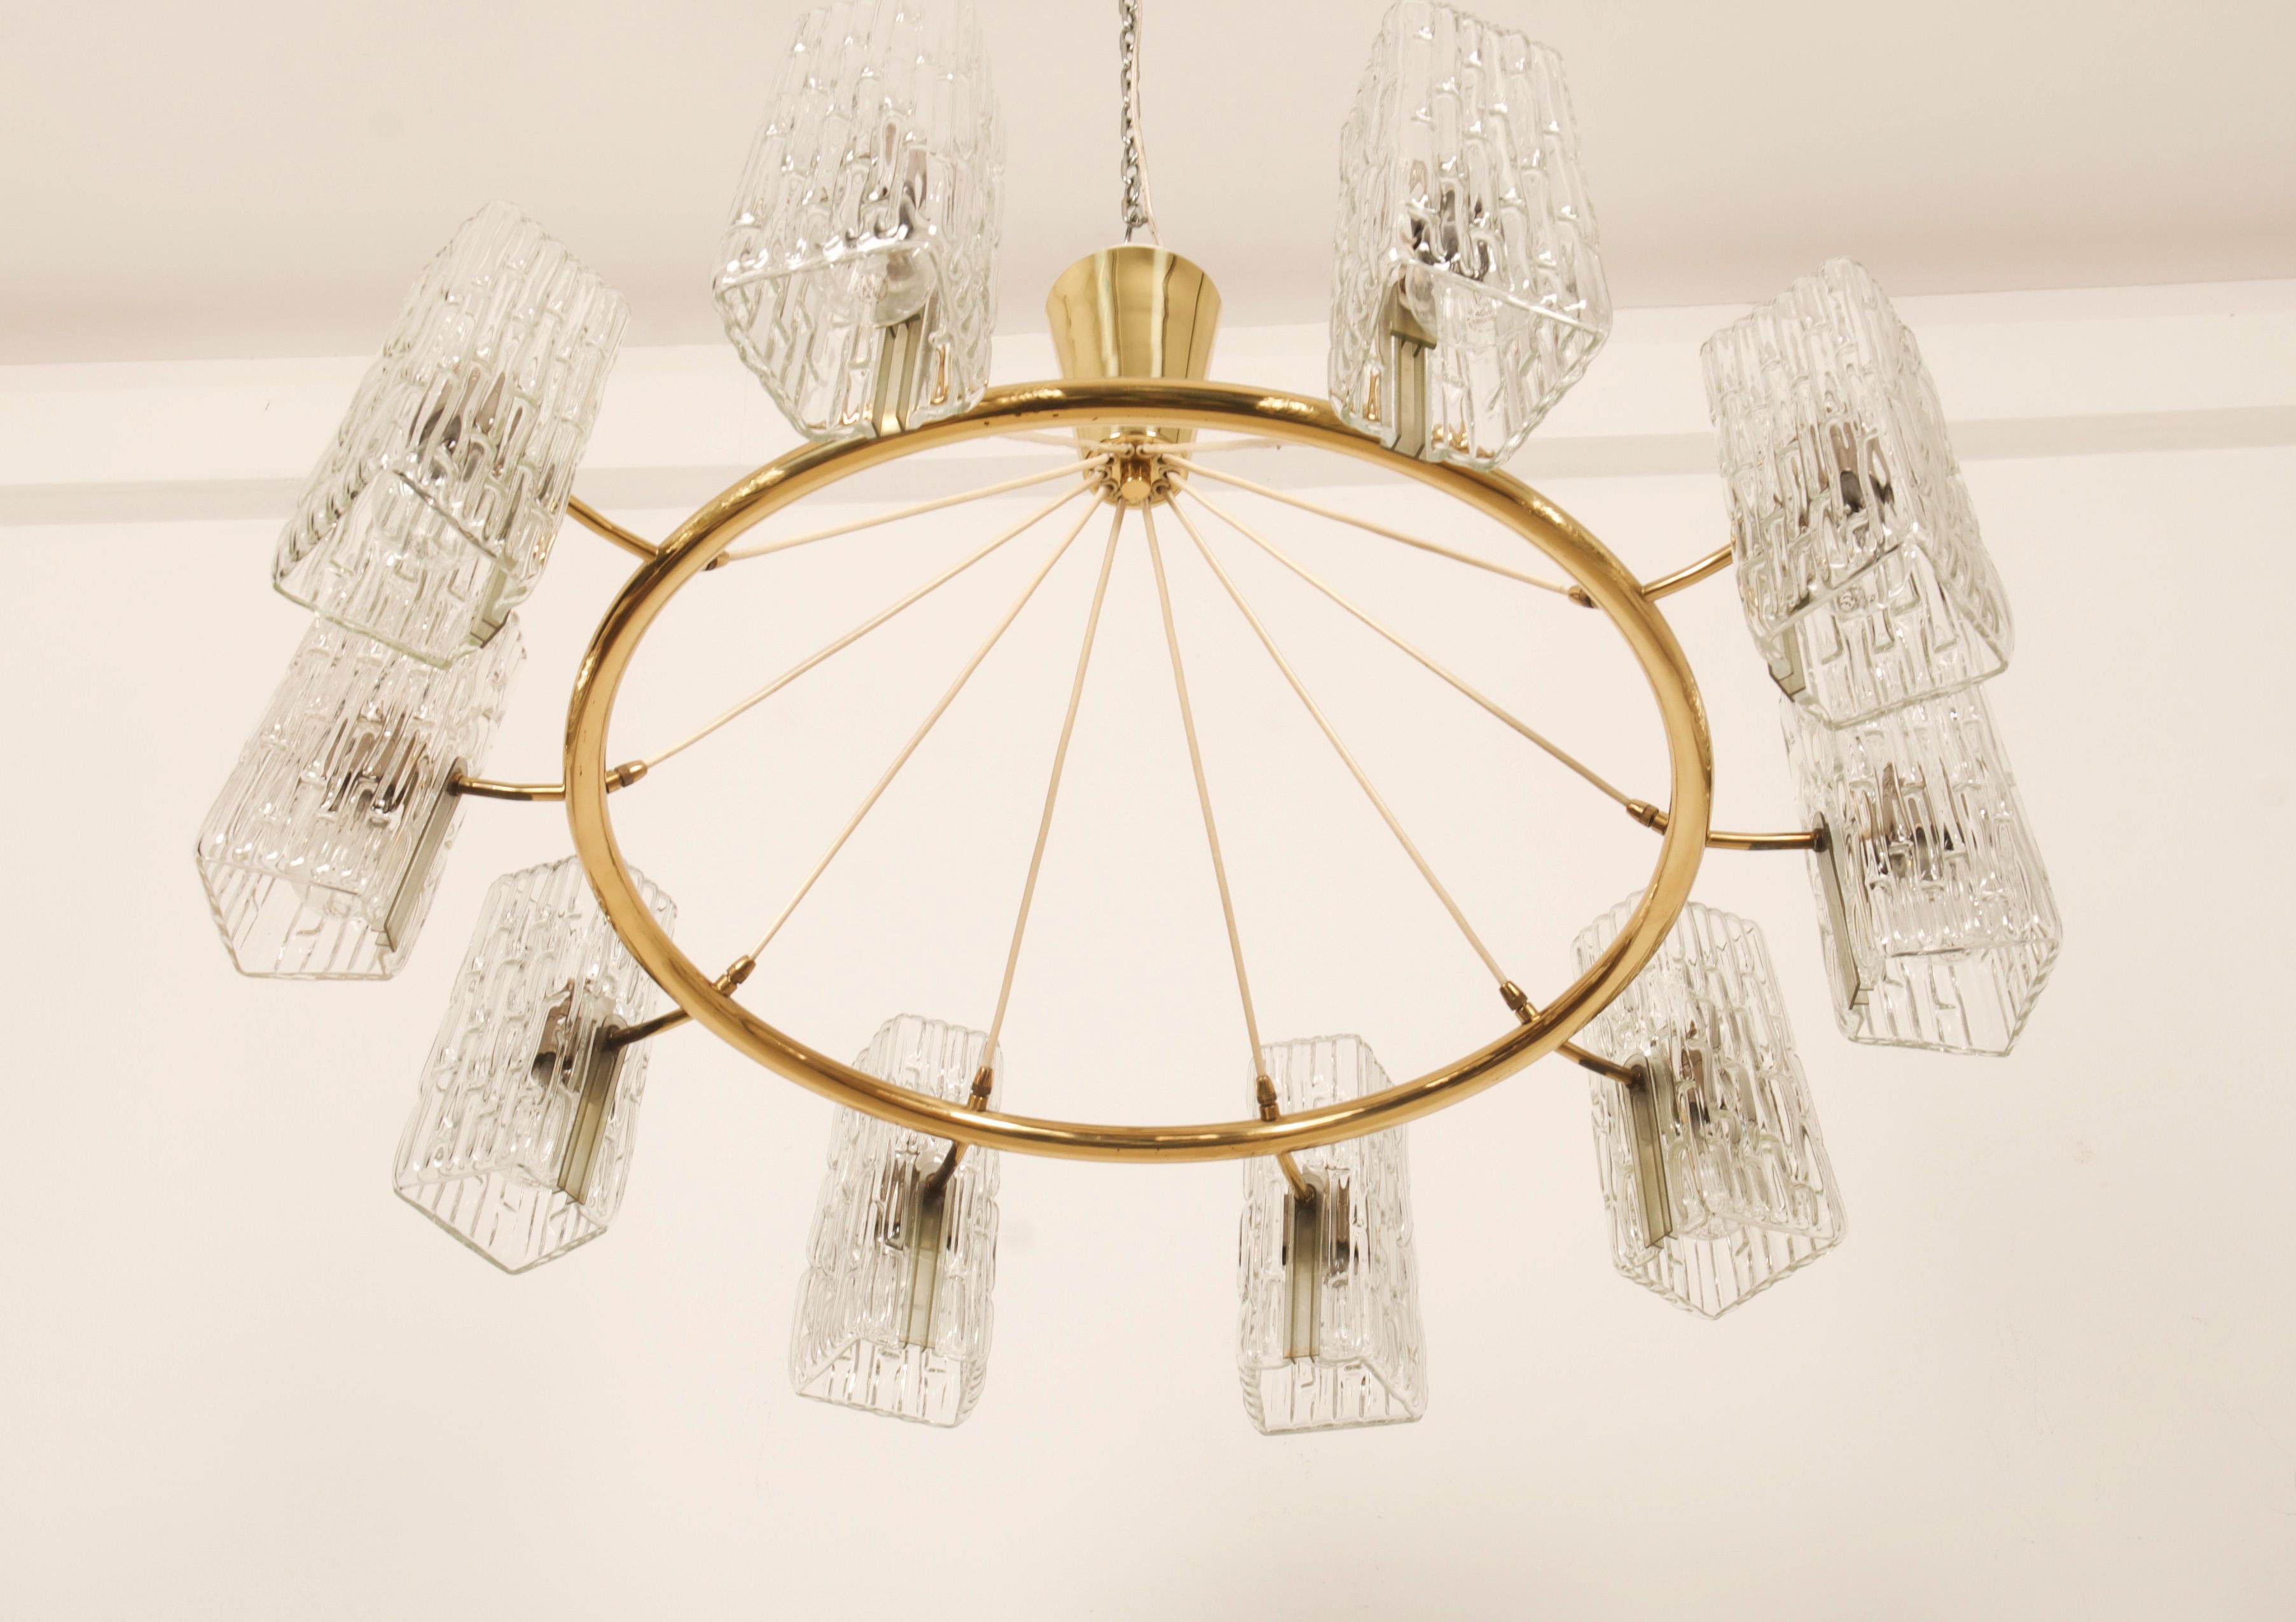 Huge Midcentury Brass Chandelier With Pressed Glass Shades By Rupert Nikoll For Sale 7